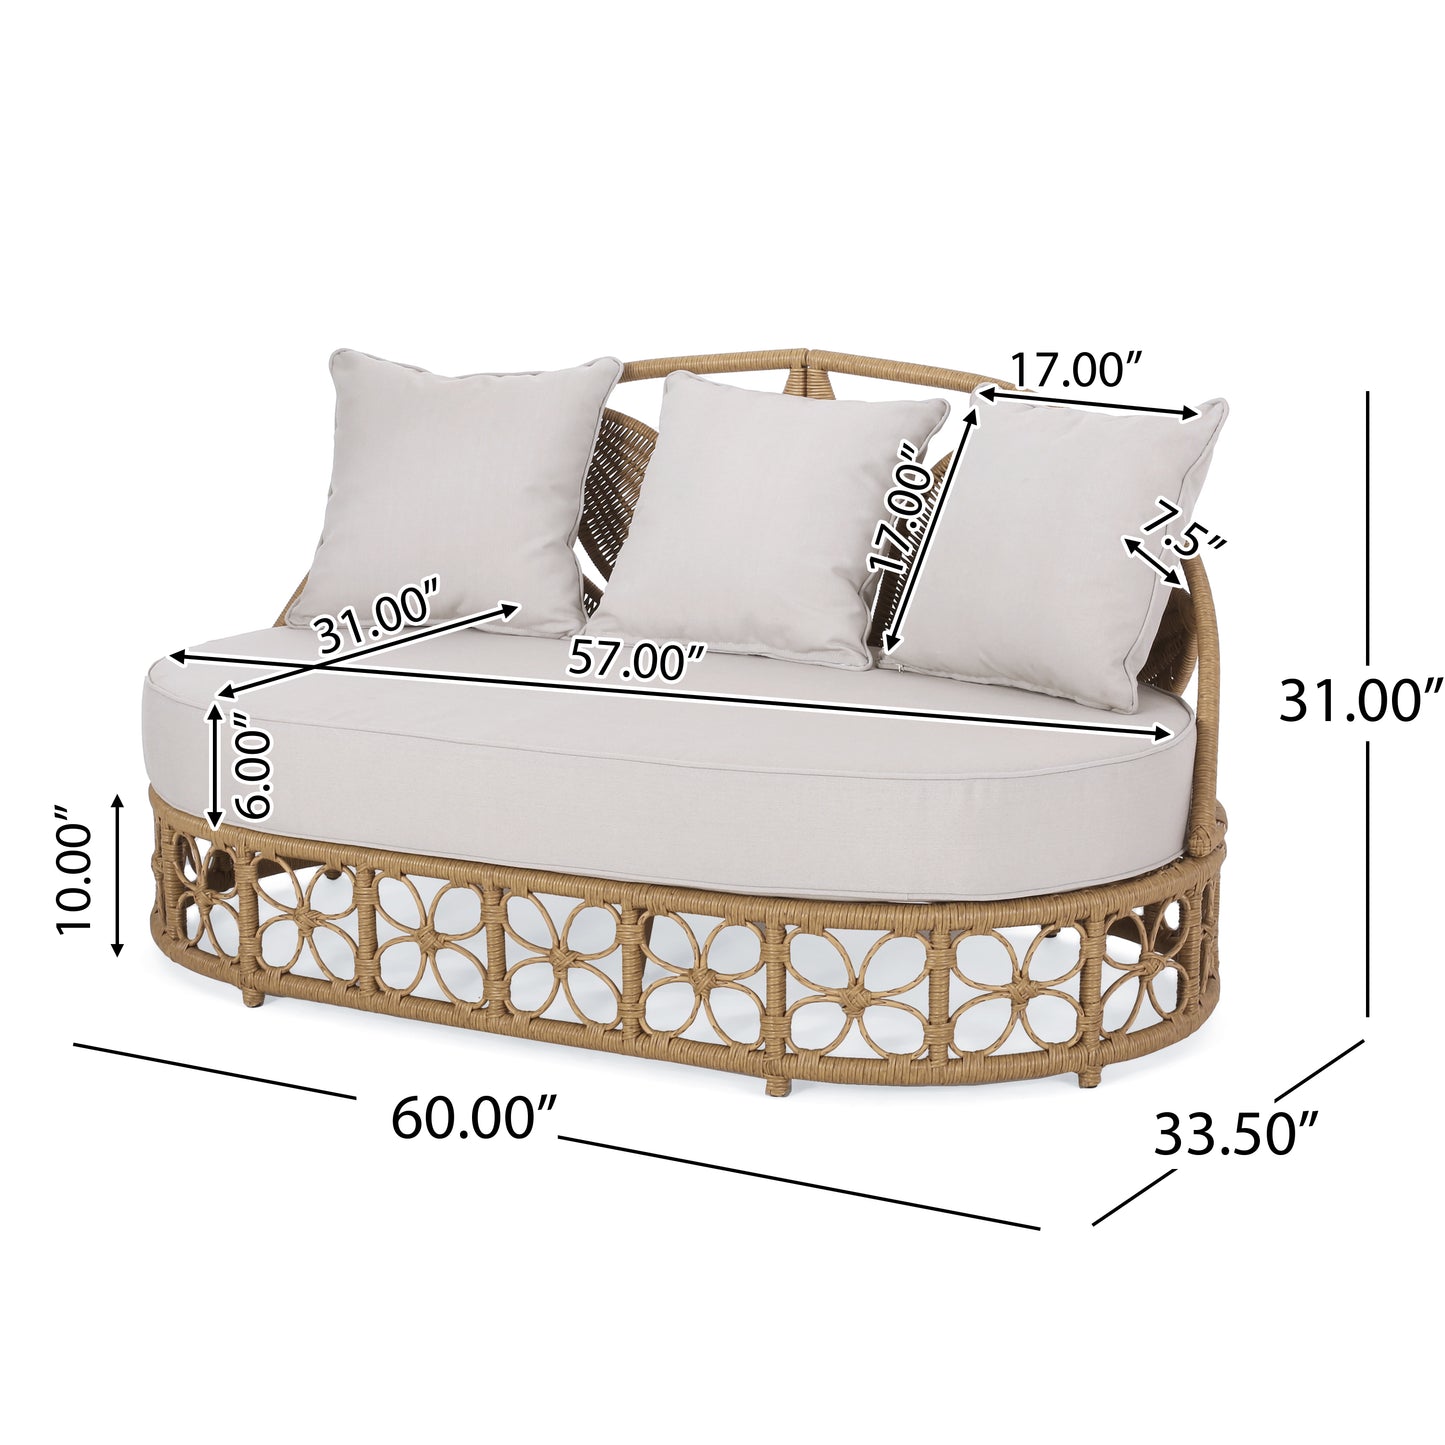 Homan Outdoor Wicker Daybed with Pillows, Light Brown and Beige